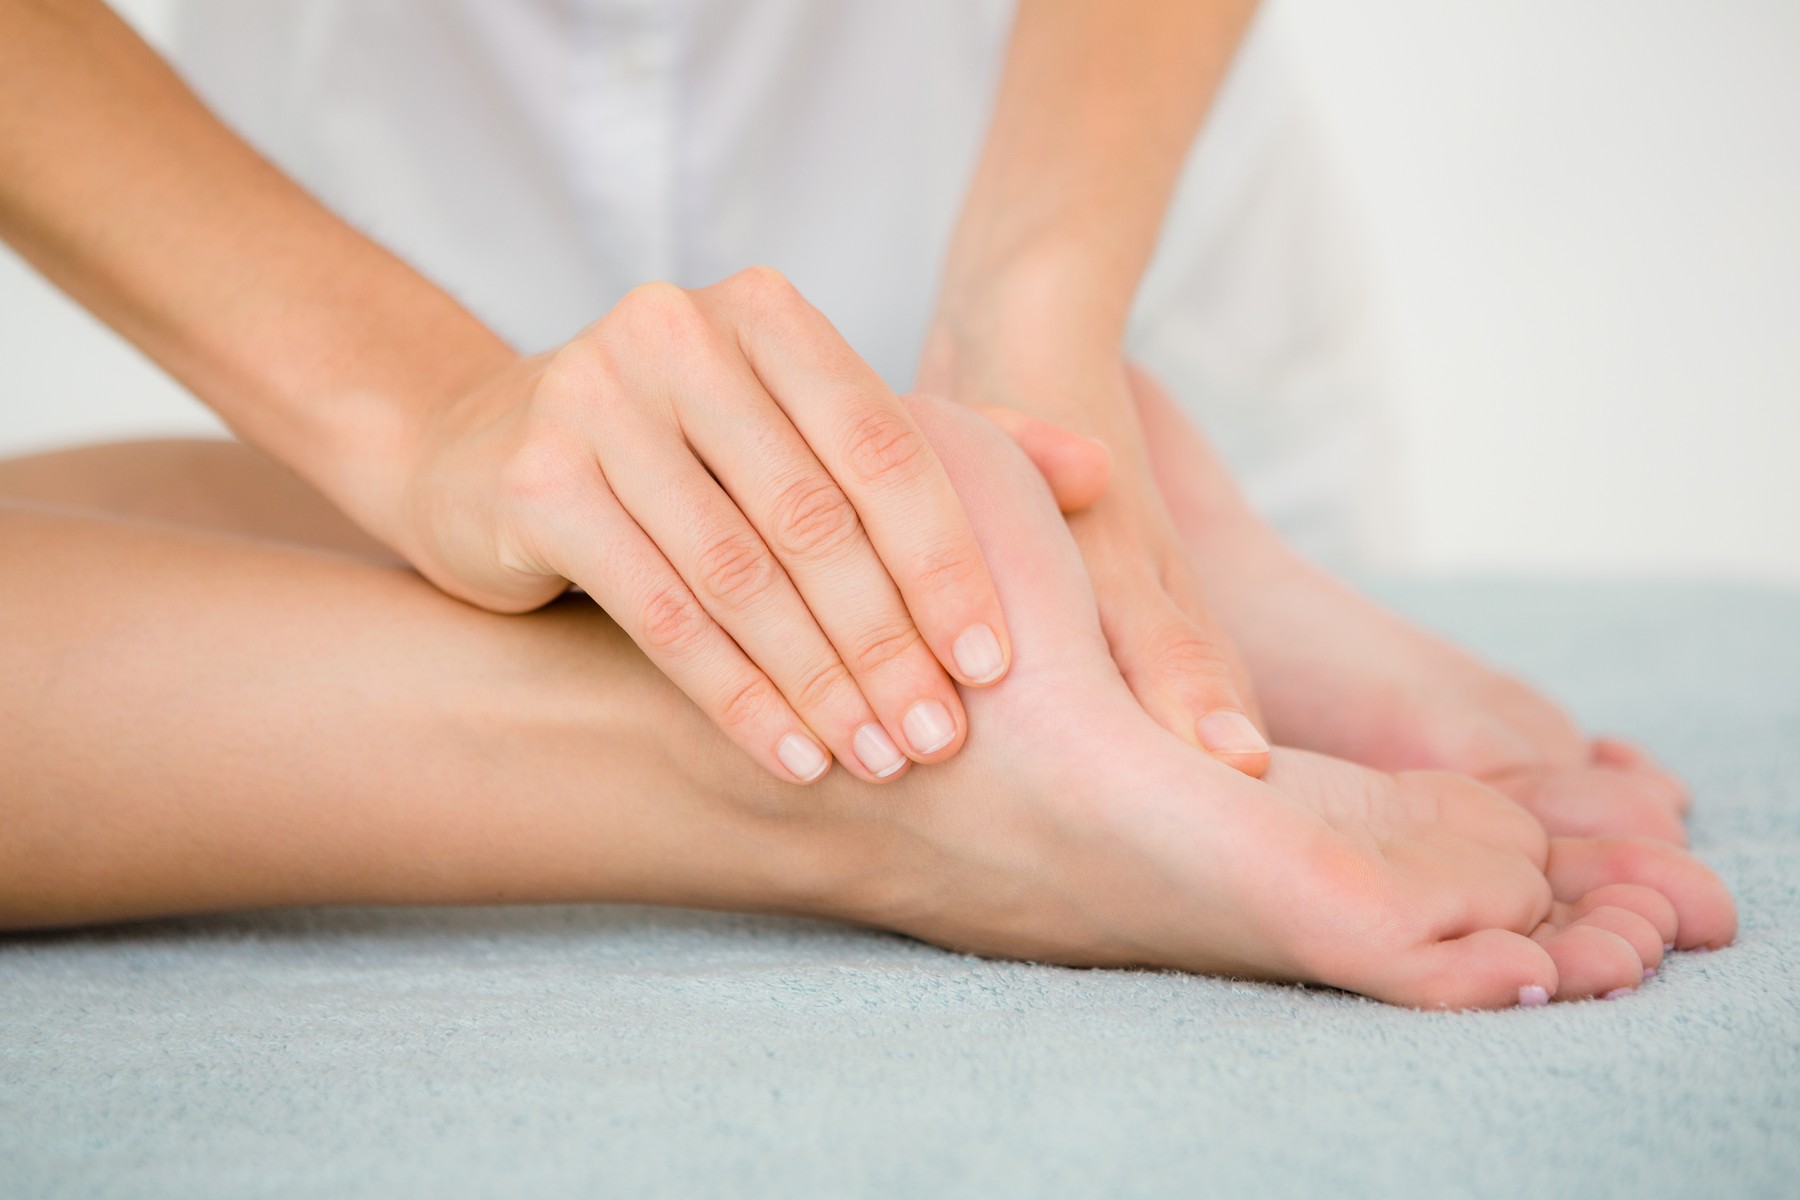 The Consequences of Leaving Plantar Fasciitis Untreated - Plantar